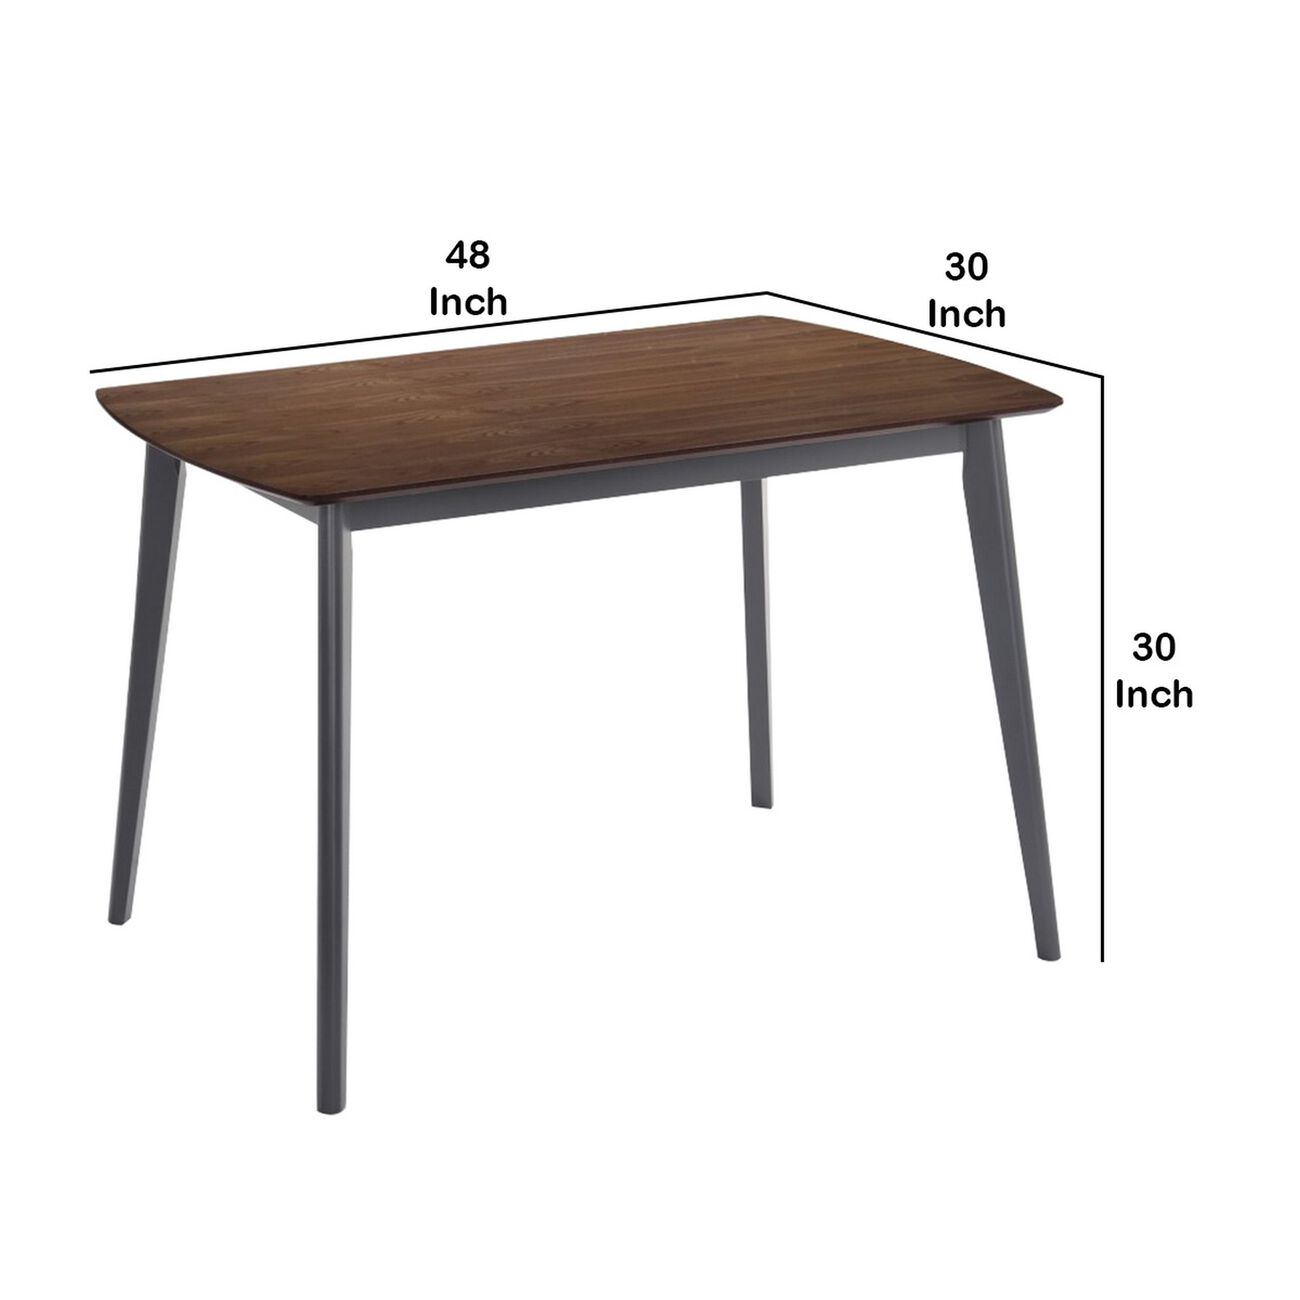 Contemporary Wooden Dining Table with Round Legs, Brown and Gray